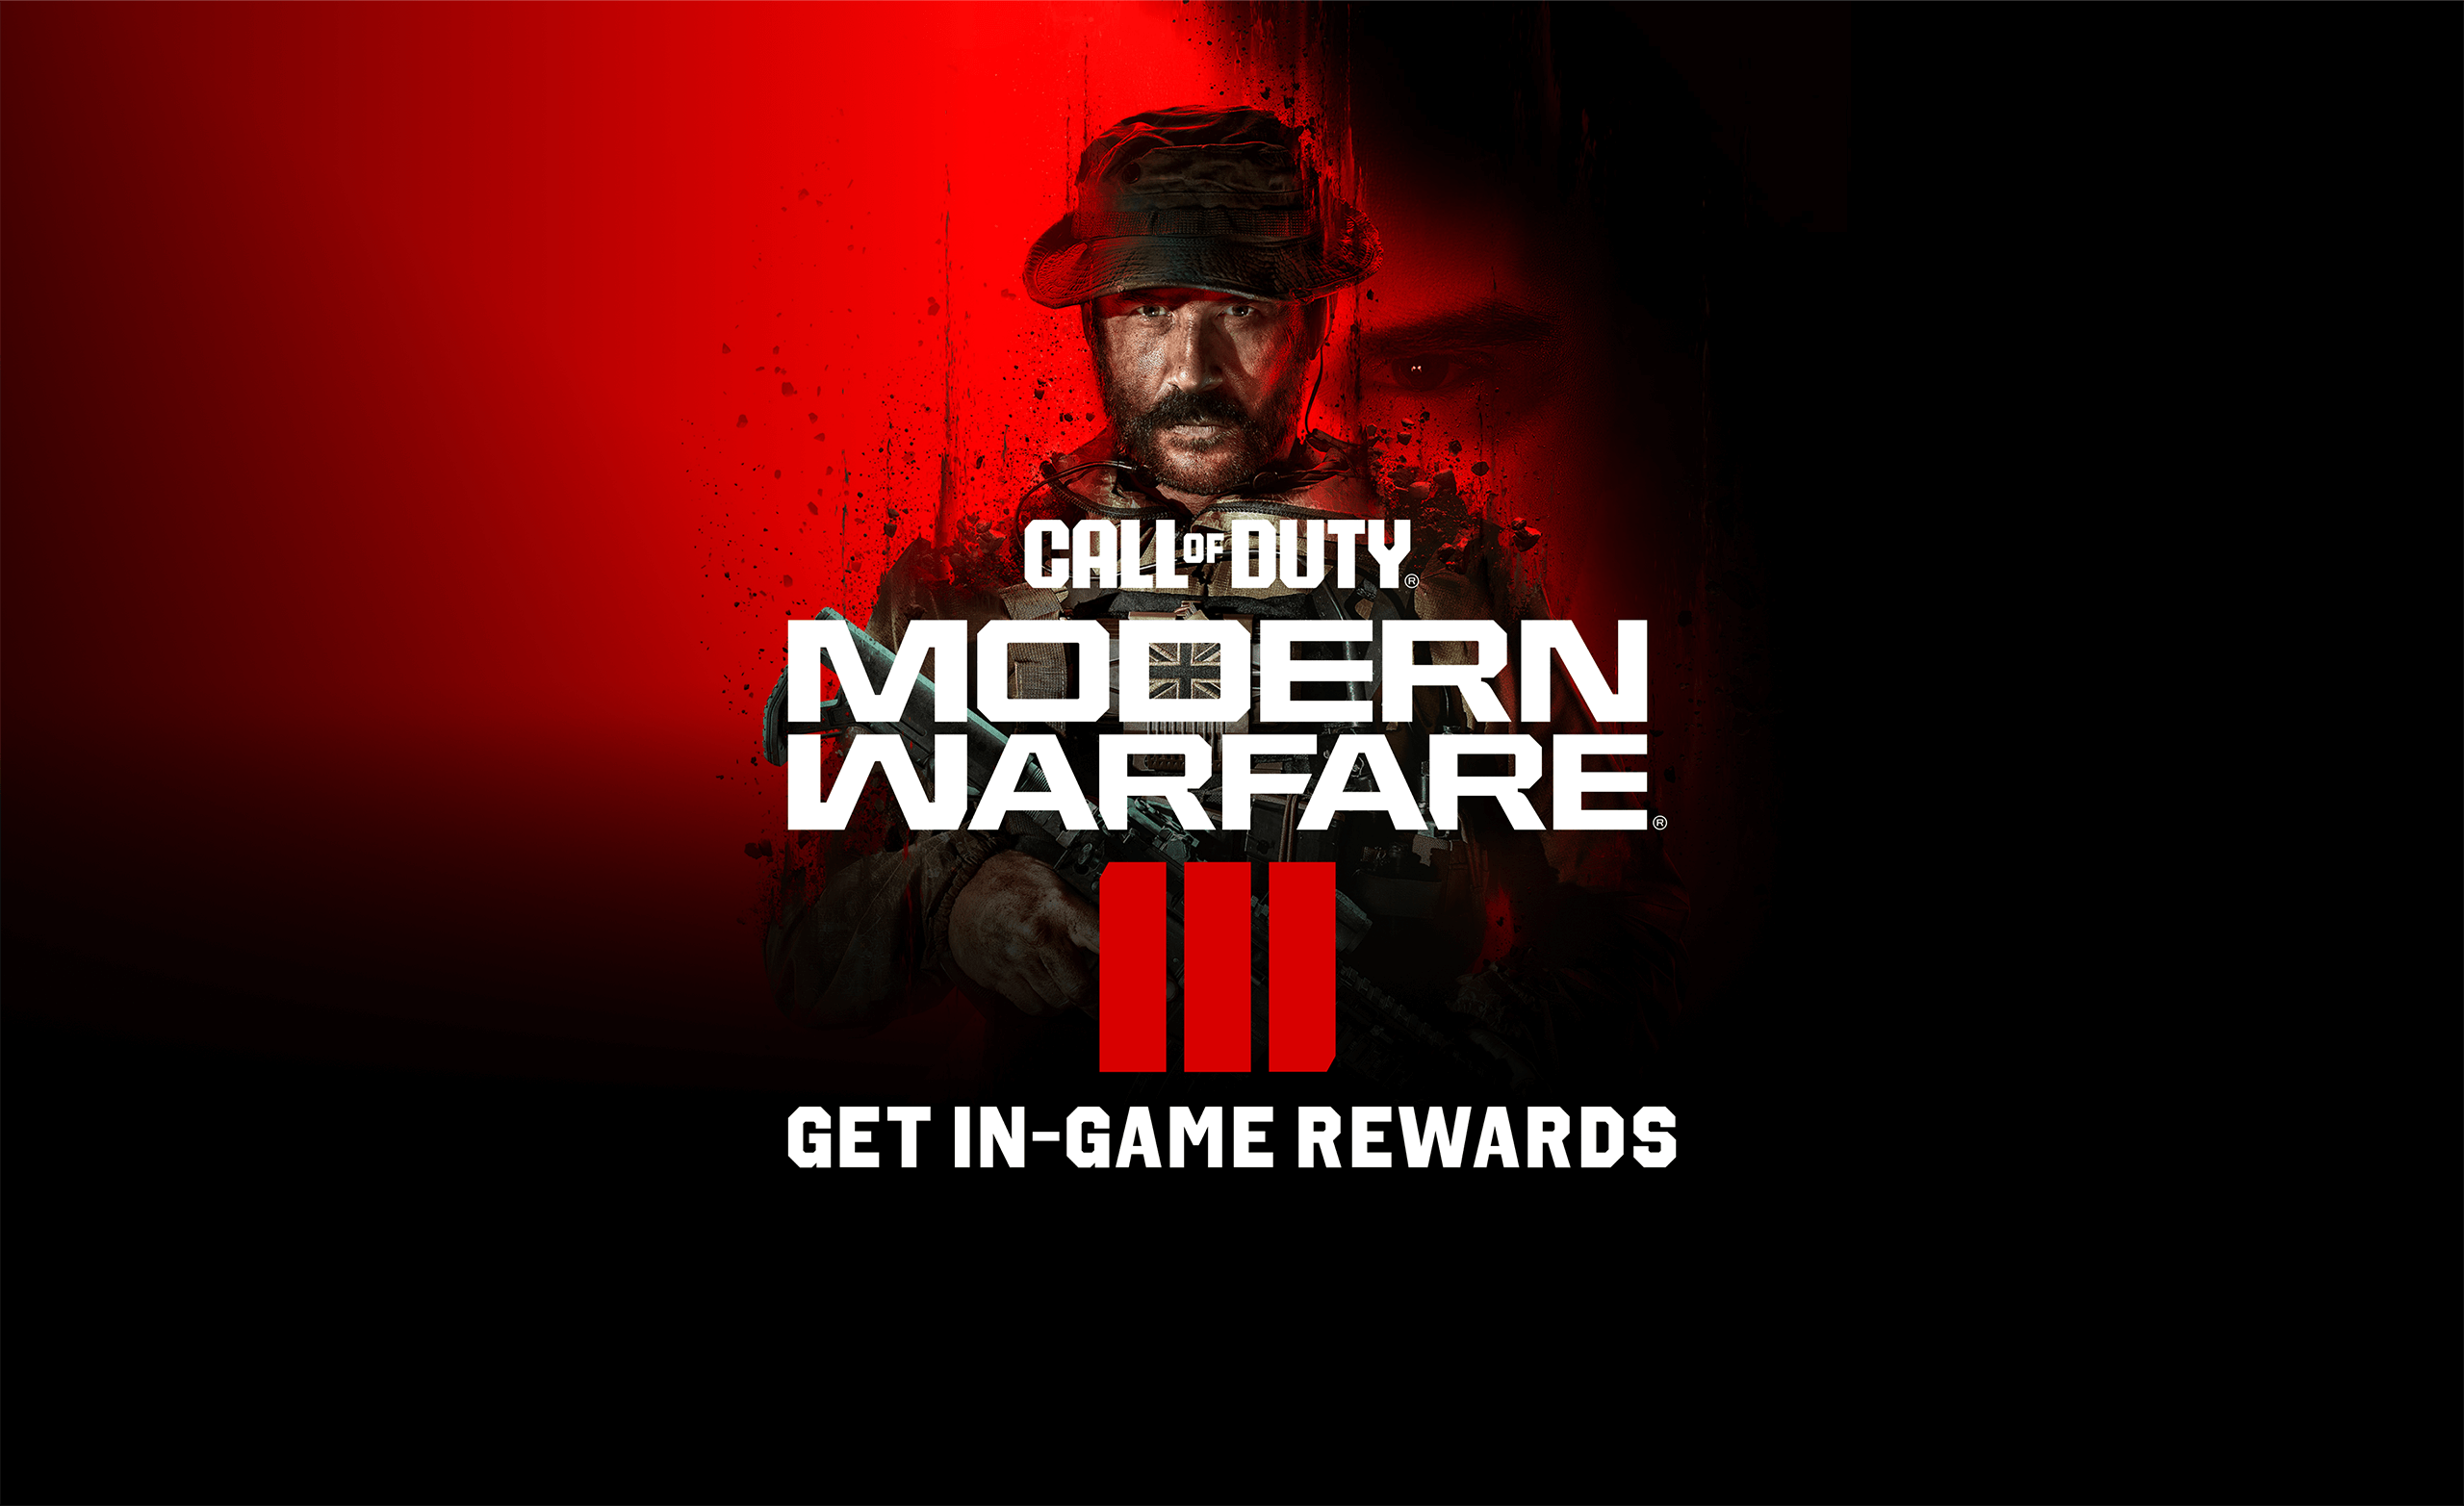 Buy a Monster Energy - Get in-game rewards for Call of Duty®: Modern Warfare